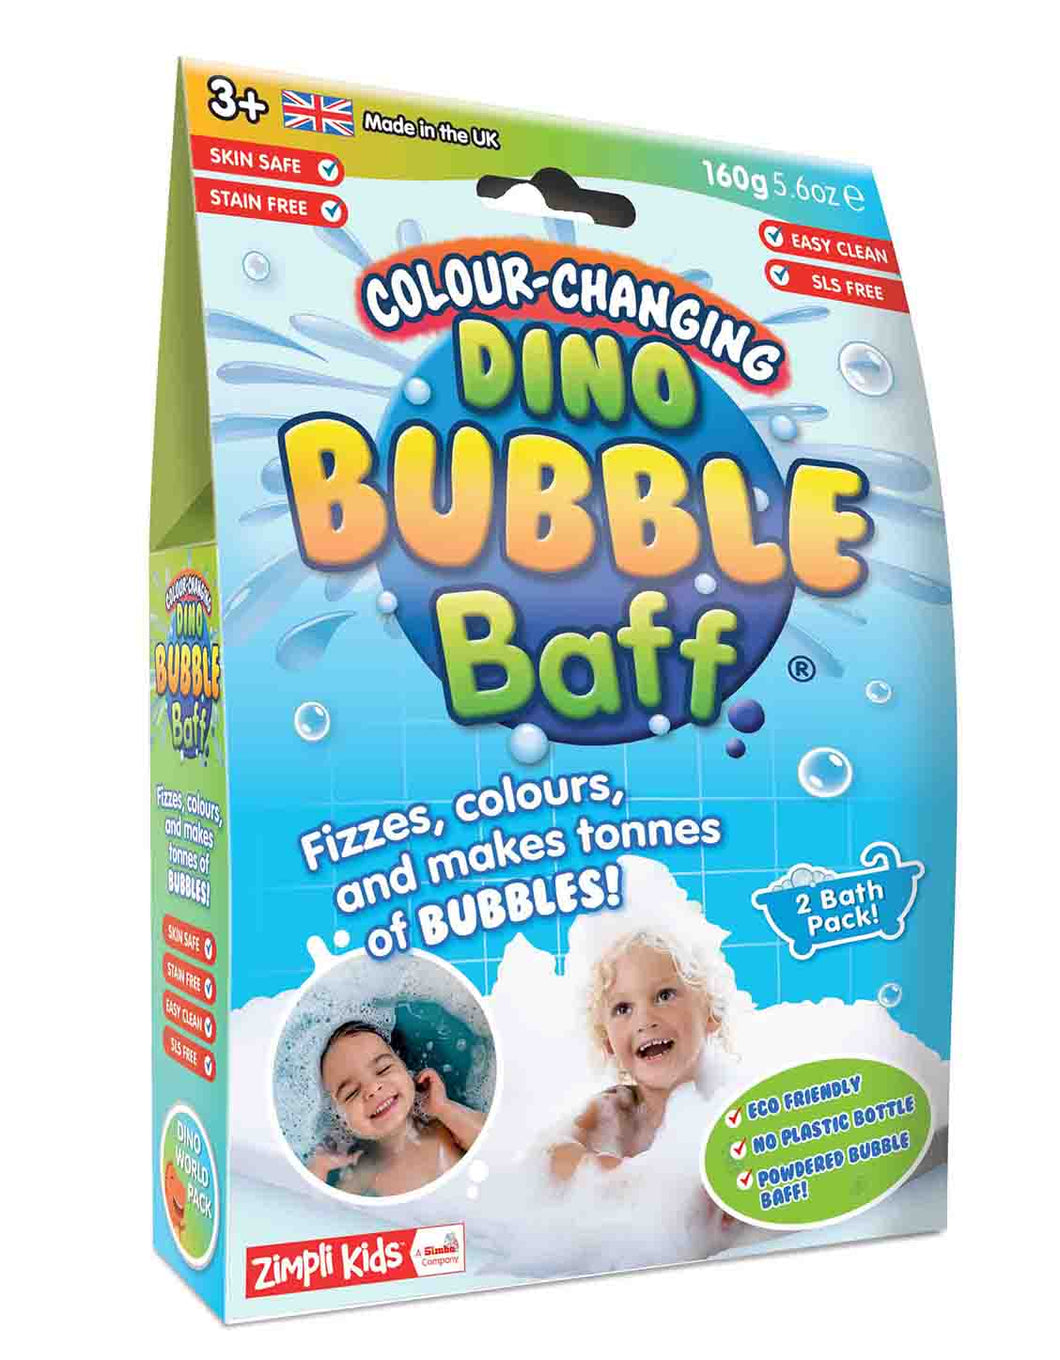 Zimpli Colour Changing Dino Bubble Baff - 2 Pack